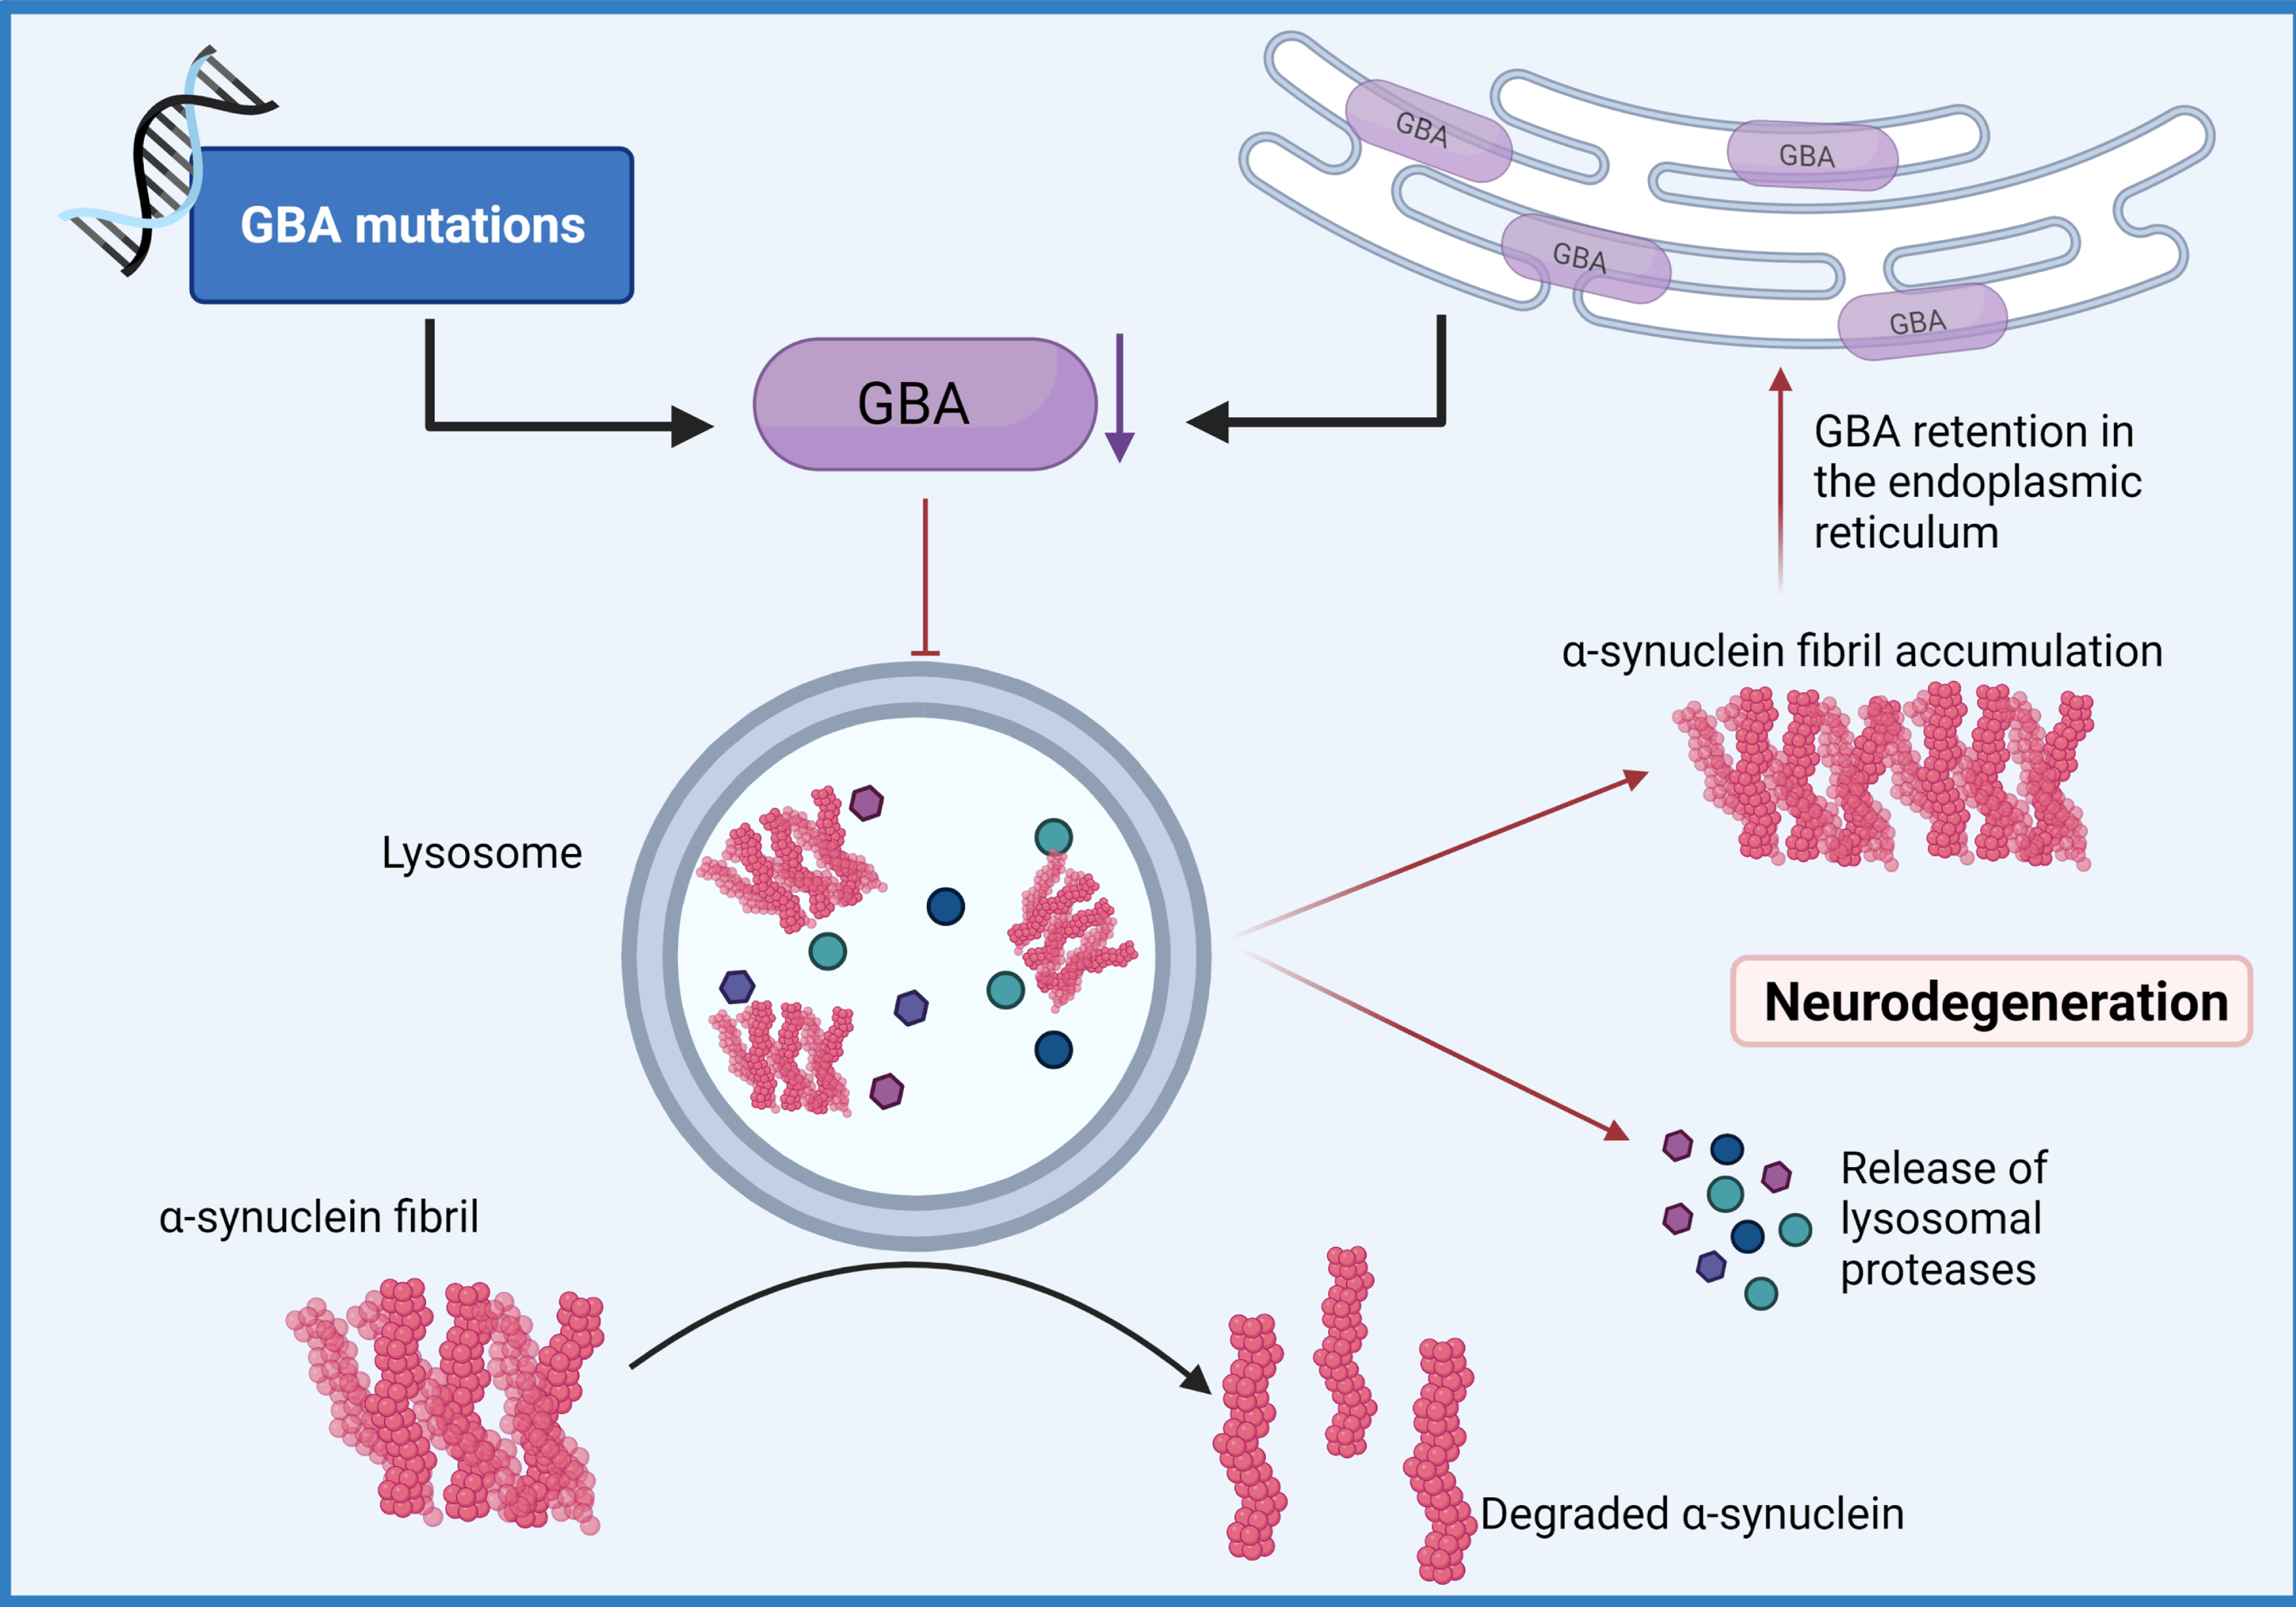 GBA-mediated Lysosomal dysfunction. Mutations of the GBA gene that result in haploinsufficiency have been shown to result in loss of lysosomal homeostasis, a reduction of glucocerebrosidase activity, the build-up of lysosomal glucosylceramides and impairs α-synuclein degradation enhancing aggregation. (Created by BioRender.com)